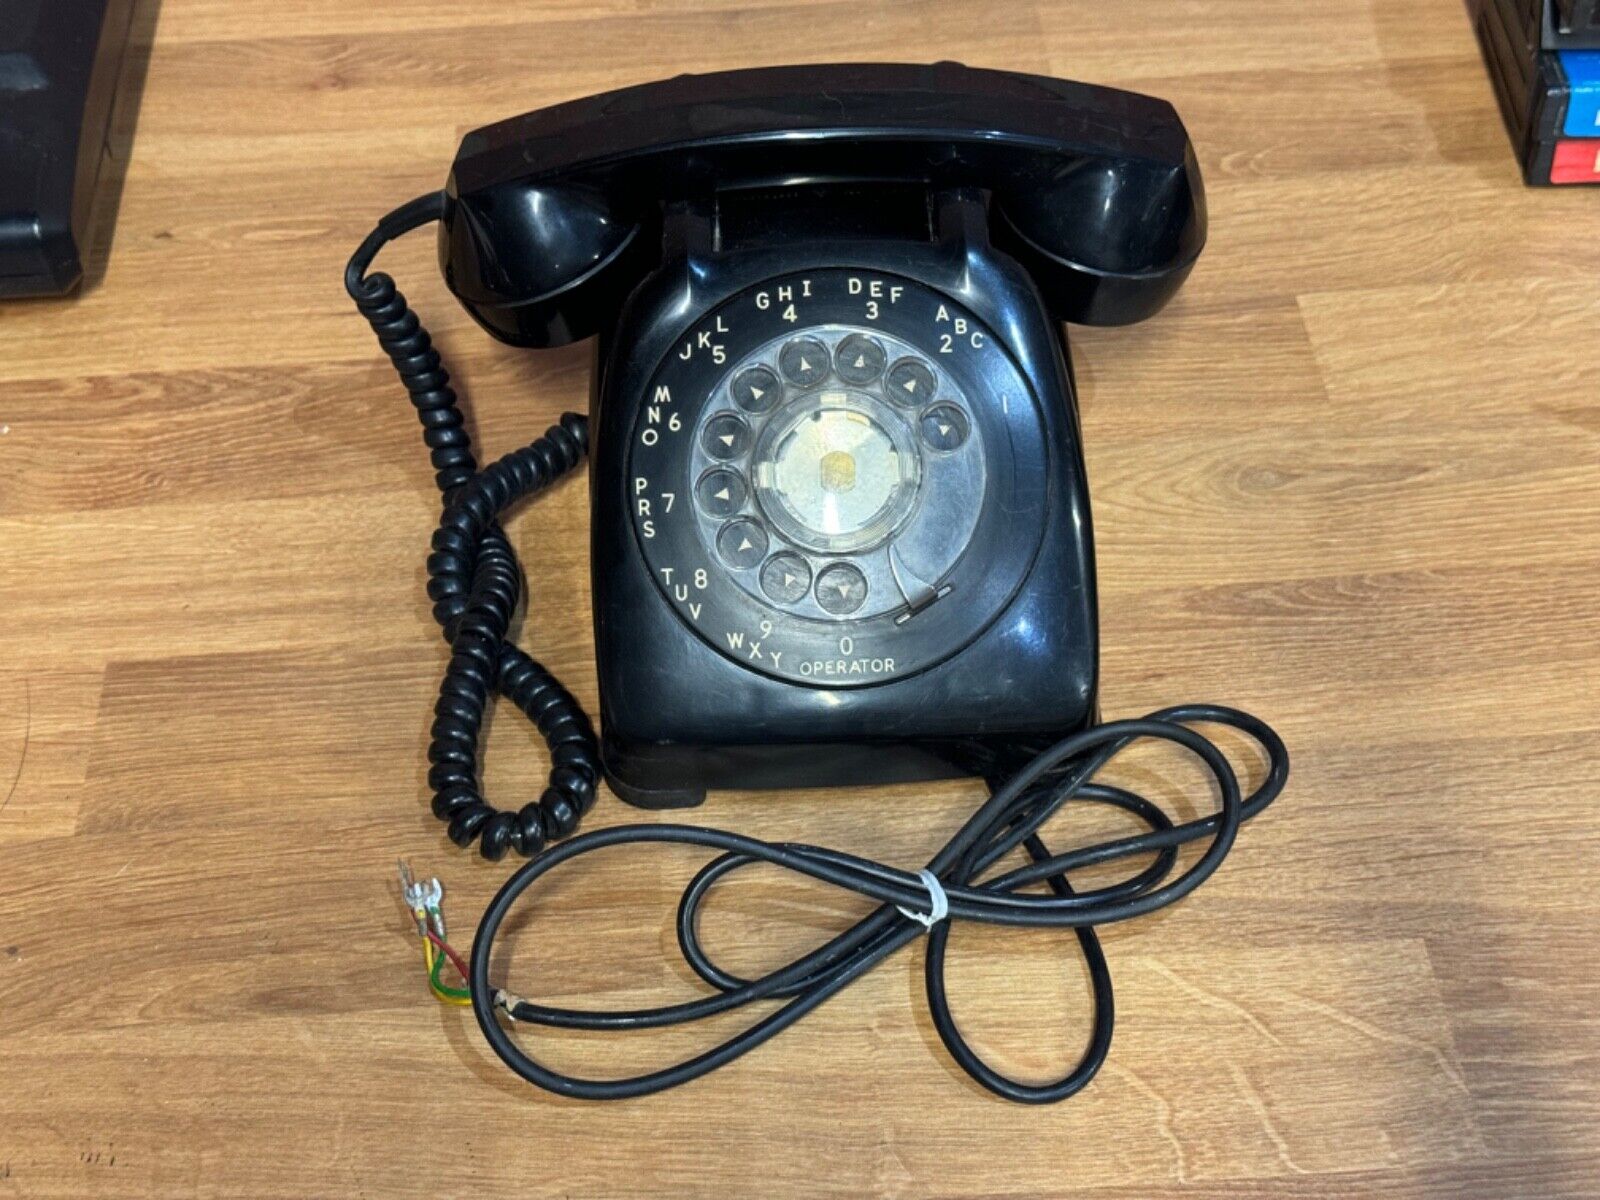 Vintage Automatic Electric Rotary Desk Telephone - Black - UNTESTED